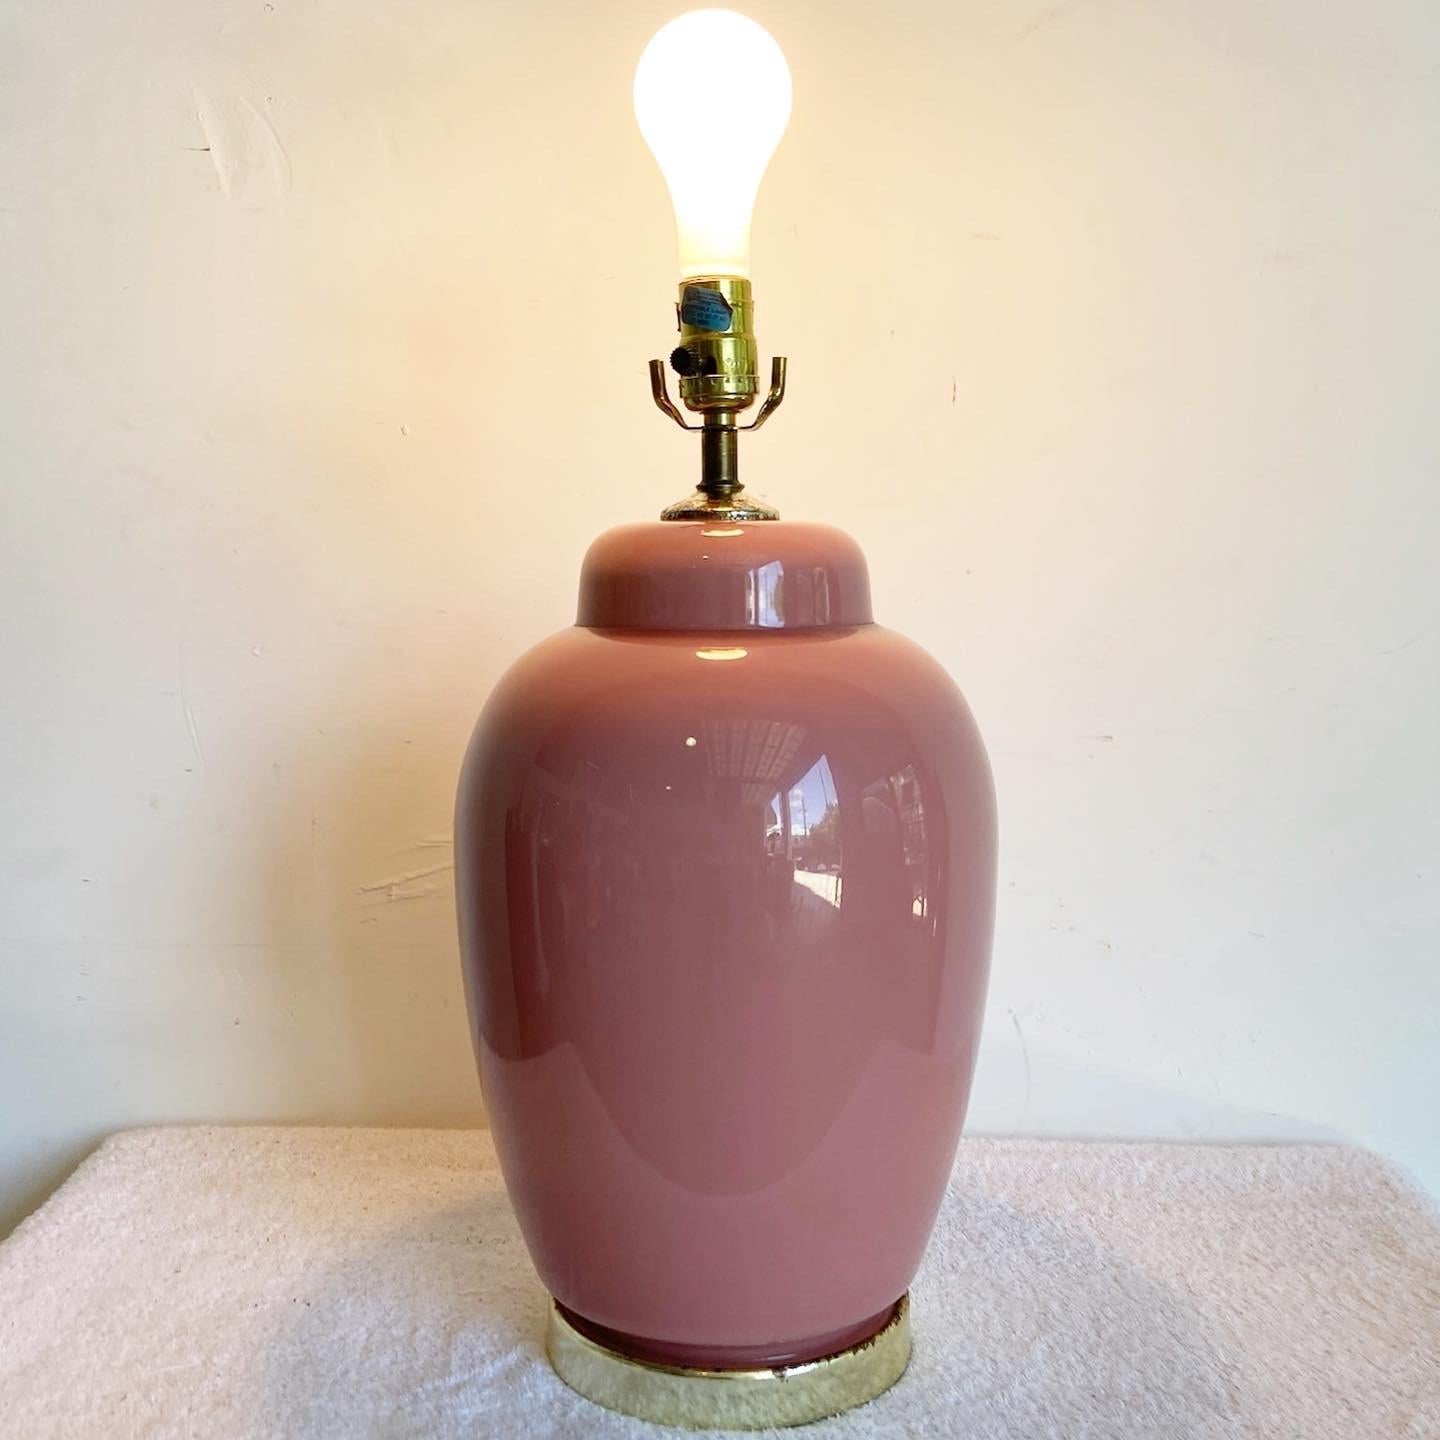 Introducing our Postmodern Pink Gloss Ceramic Table Lamp, a blend of contemporary design and elegant aesthetics. Featuring a sleek ceramic base in vibrant pink, this compact lamp adds a sophisticated pop of color to any space, perfectly suitable for